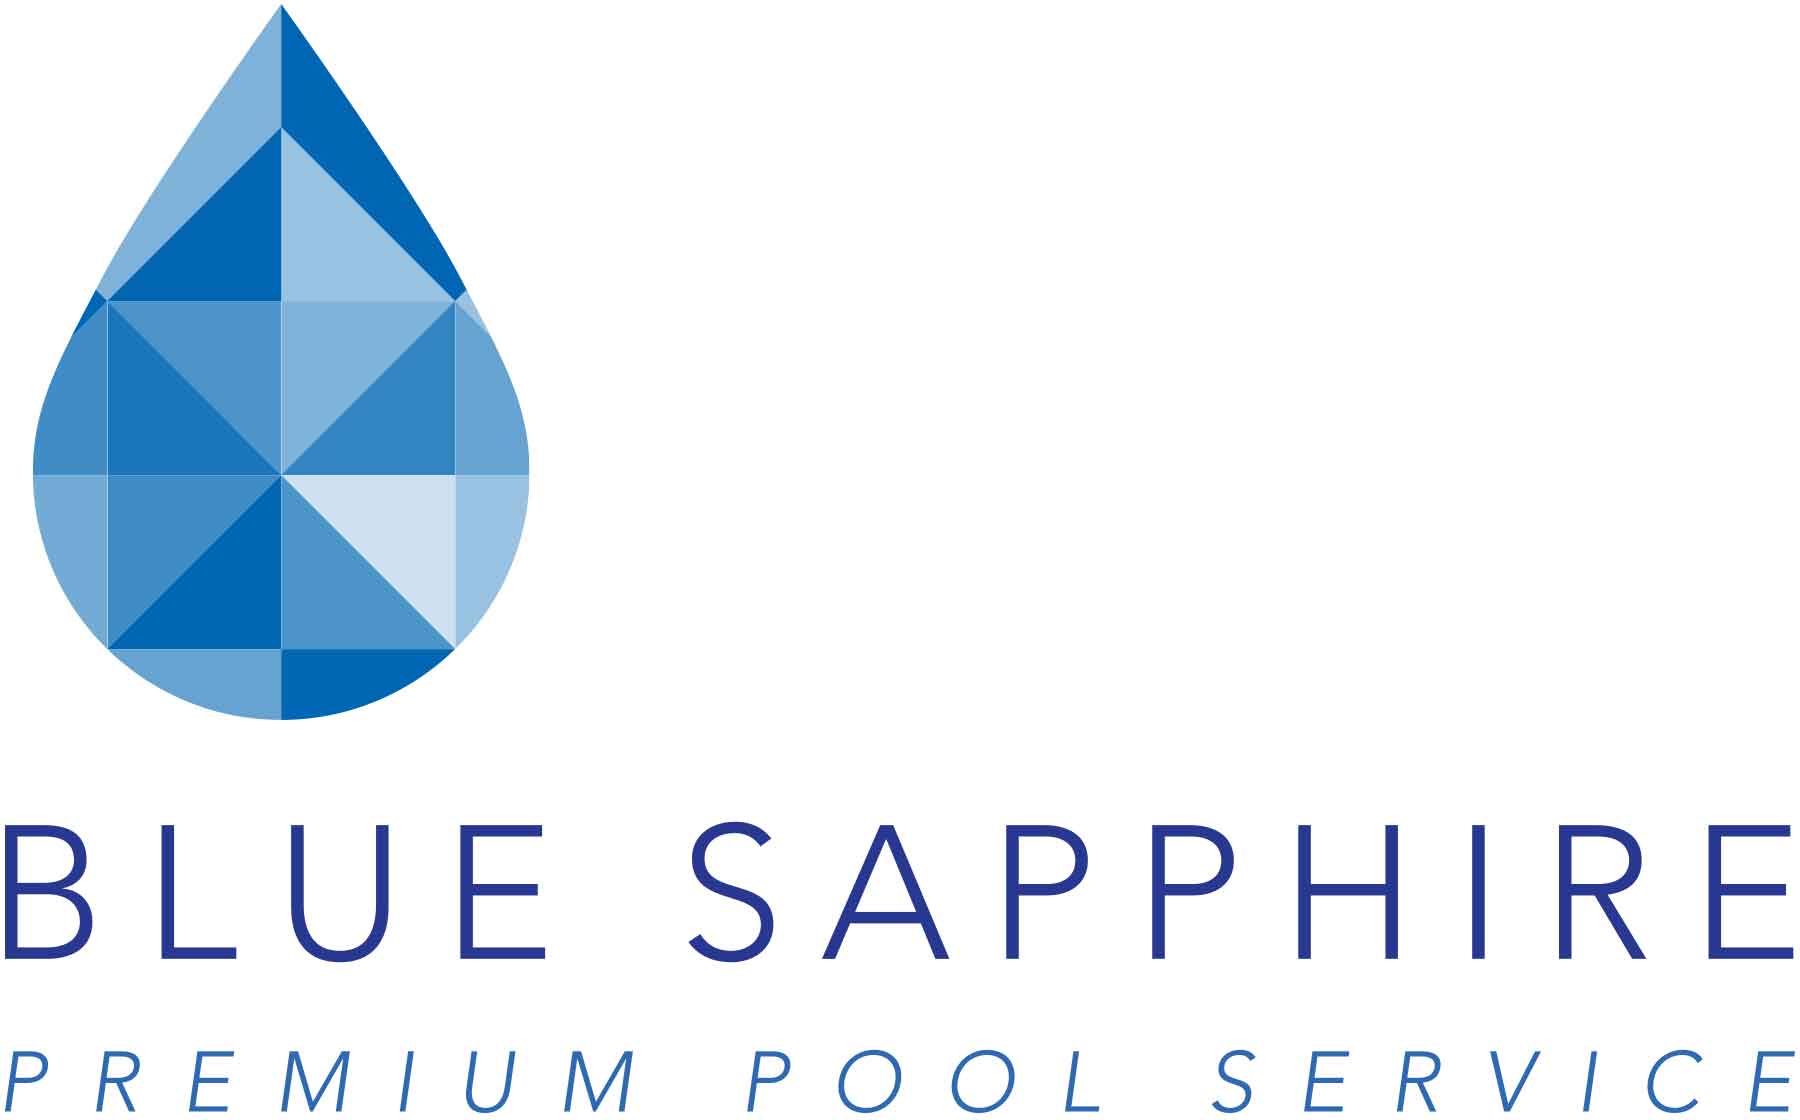 Clearwater Pools premium service logo